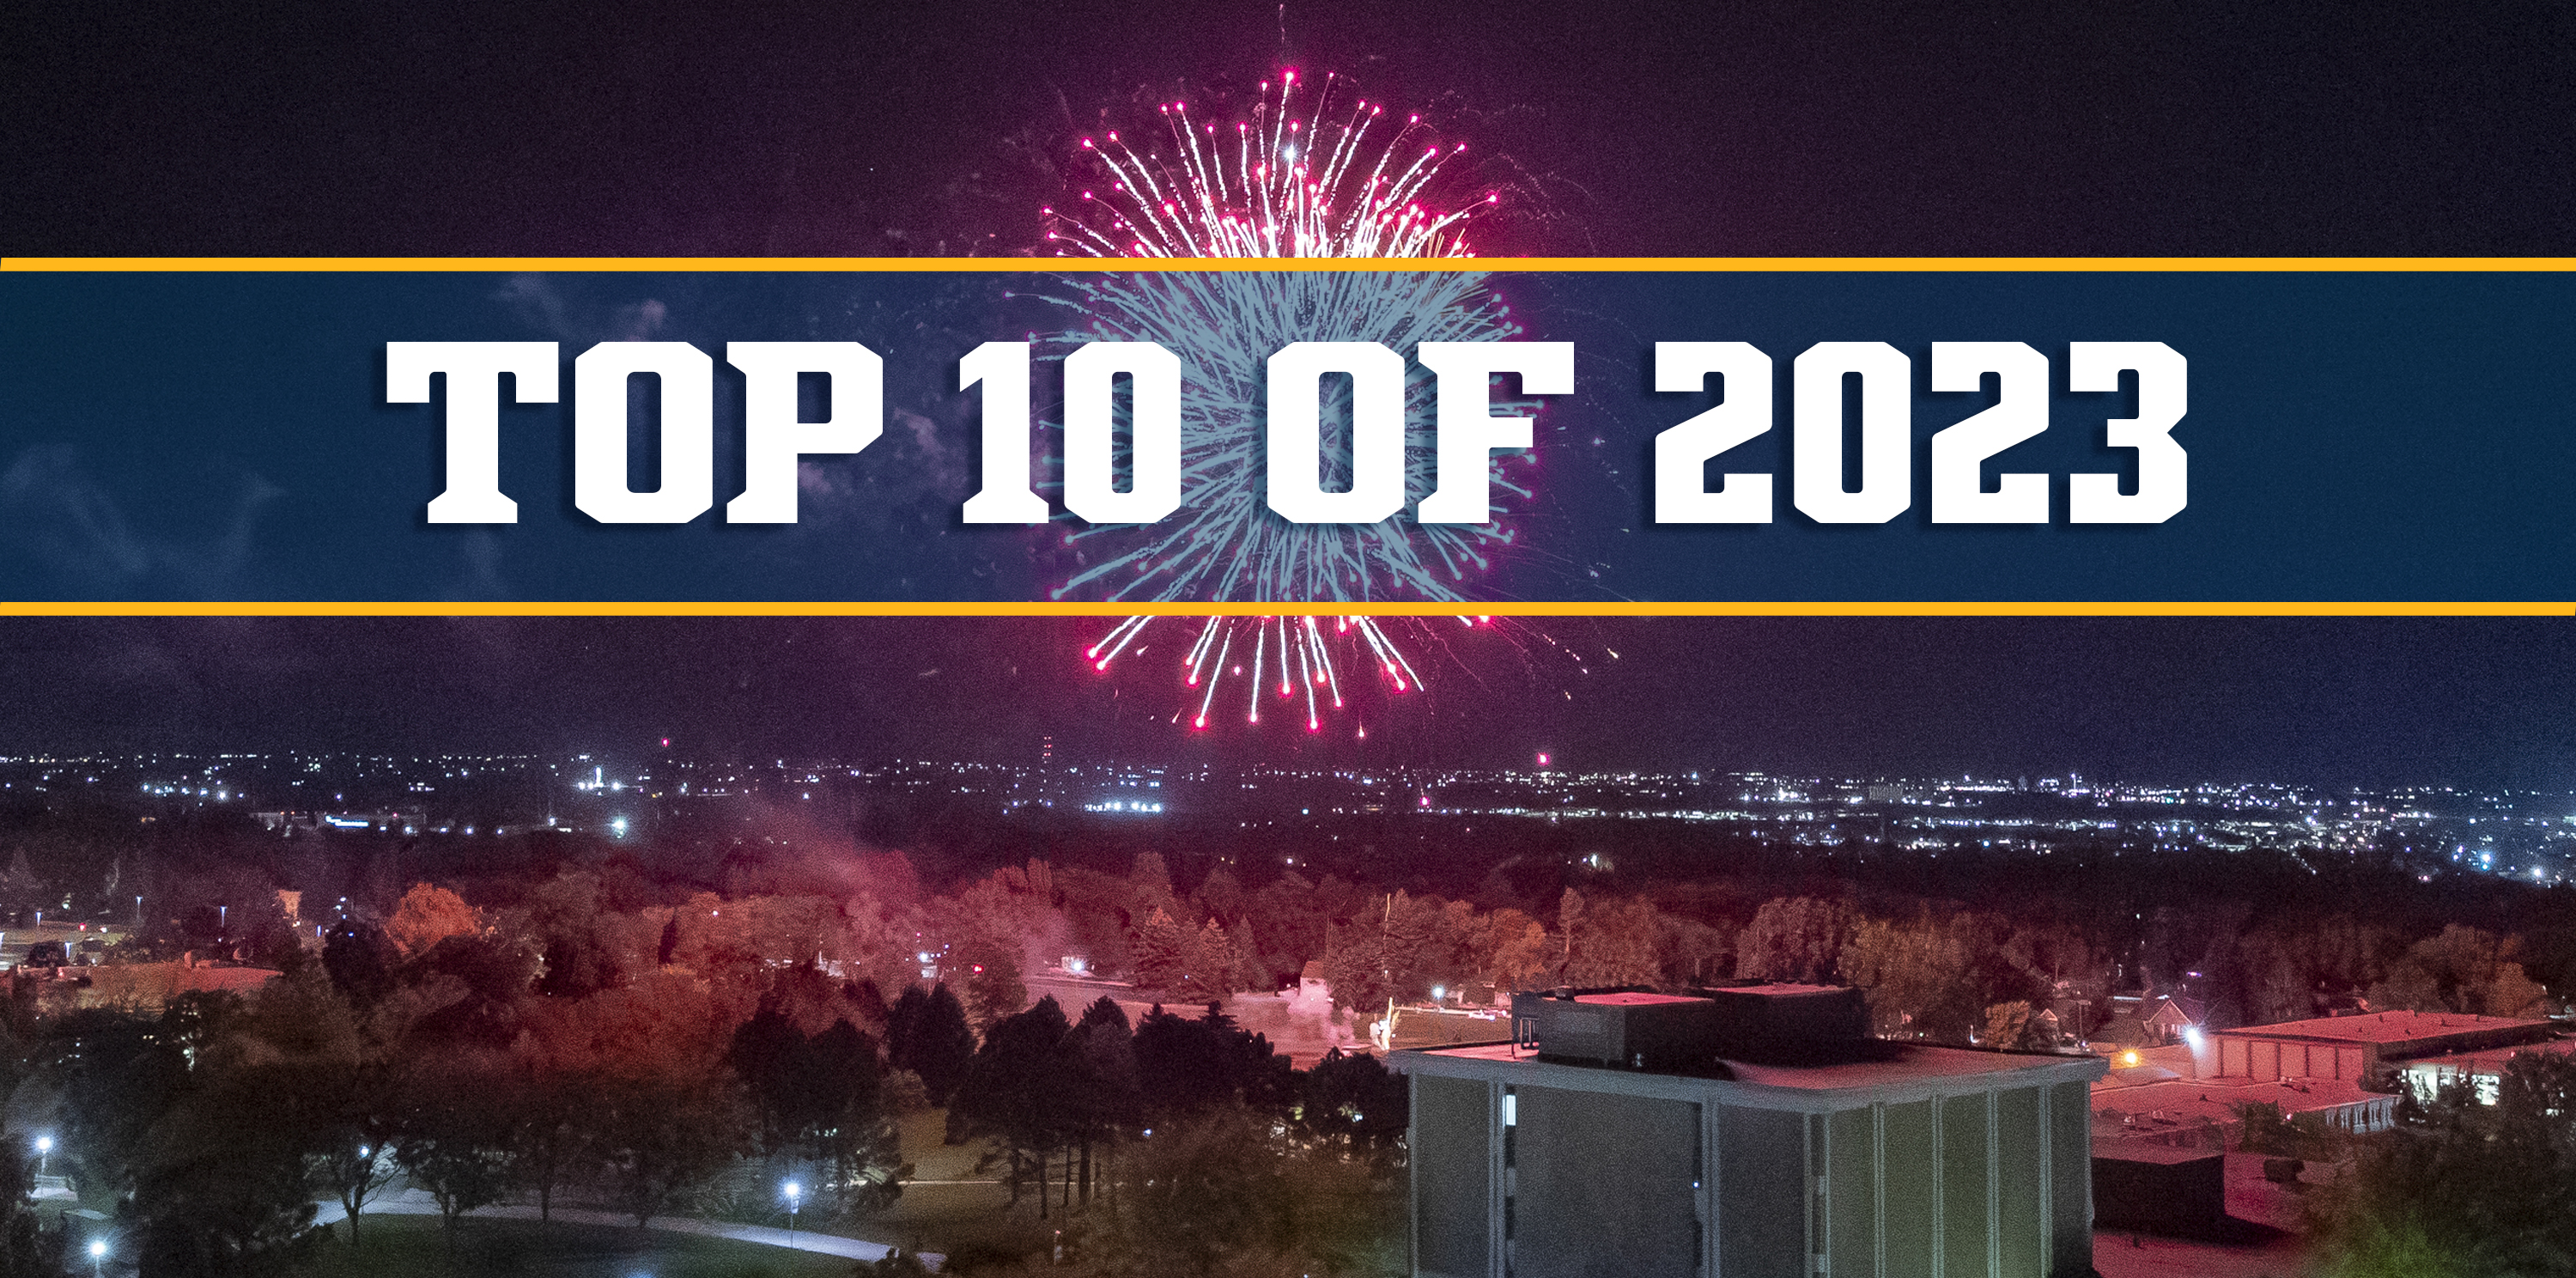 Top 10 of 2023 written in bold text against a background of fireworks in the sky above West Campus